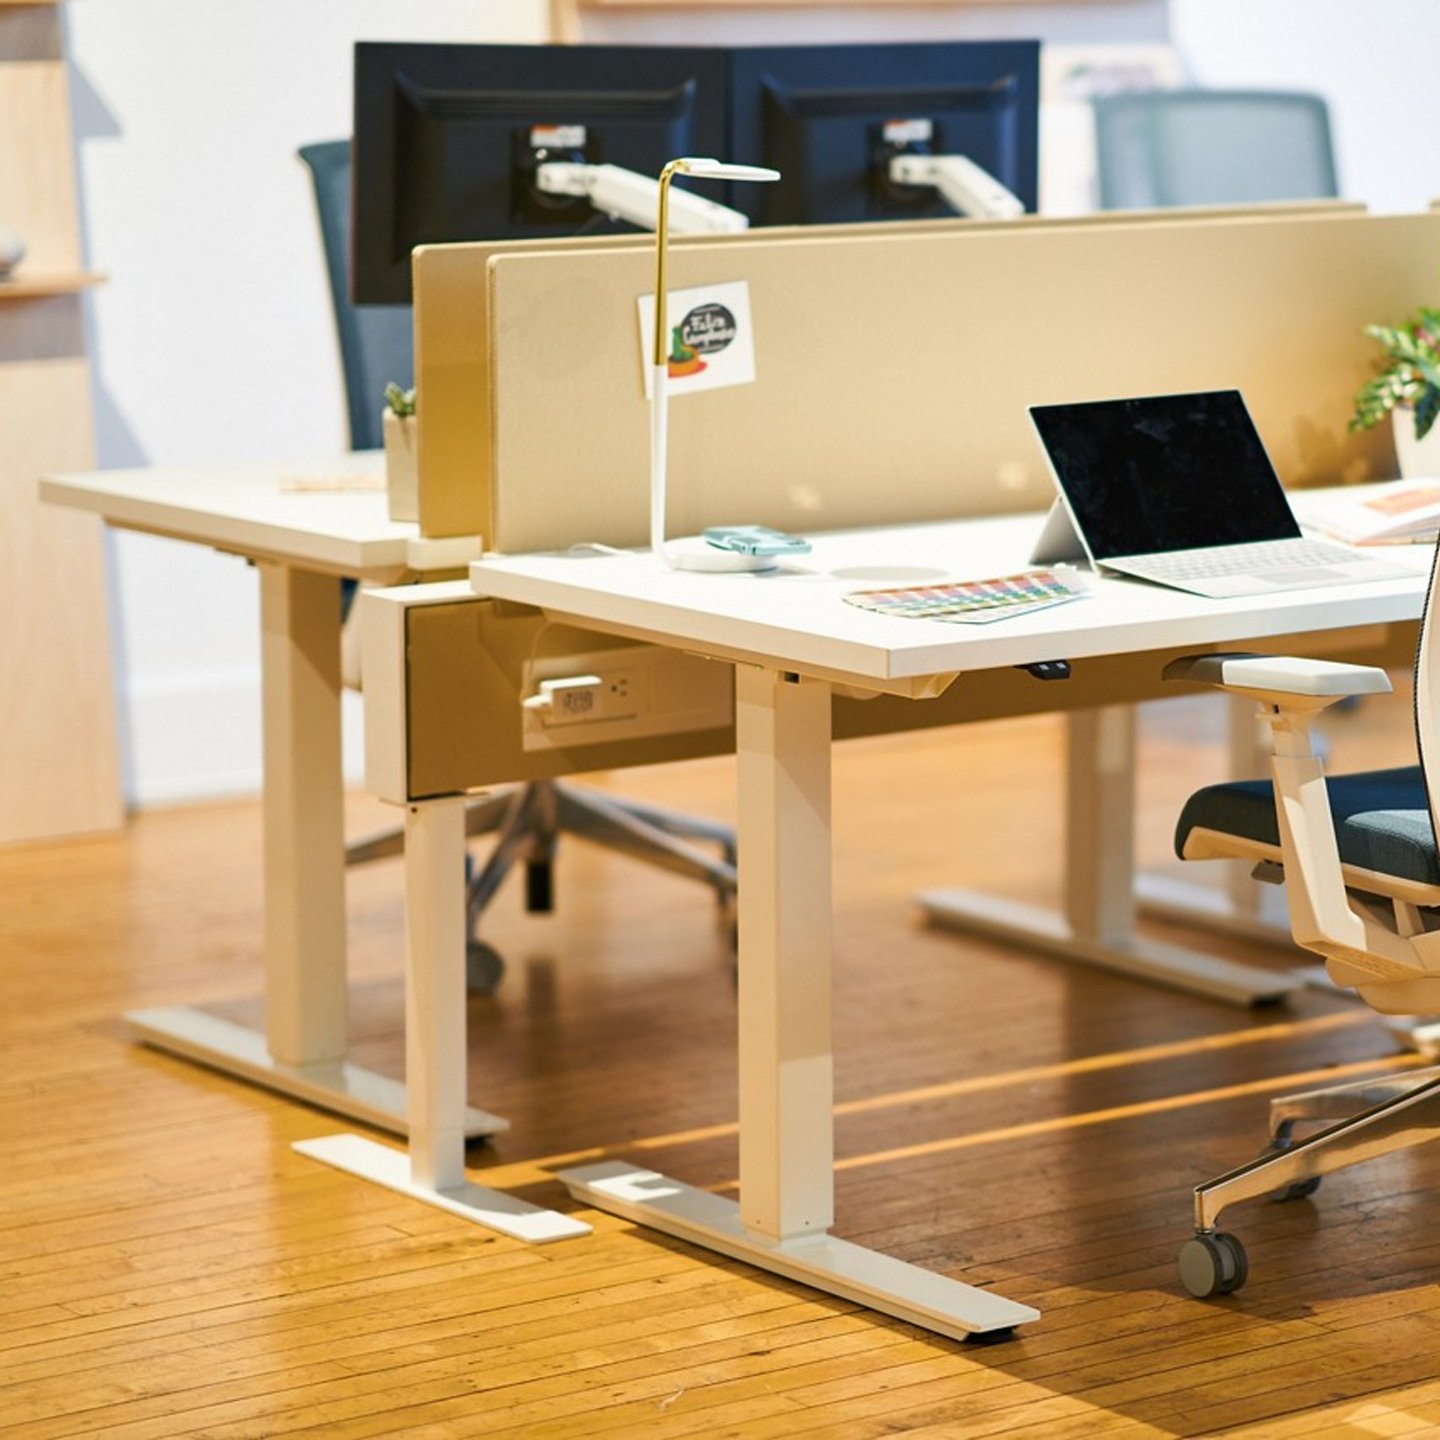 Haworth Compose Beam Workspace divider between desks with a chair in office space